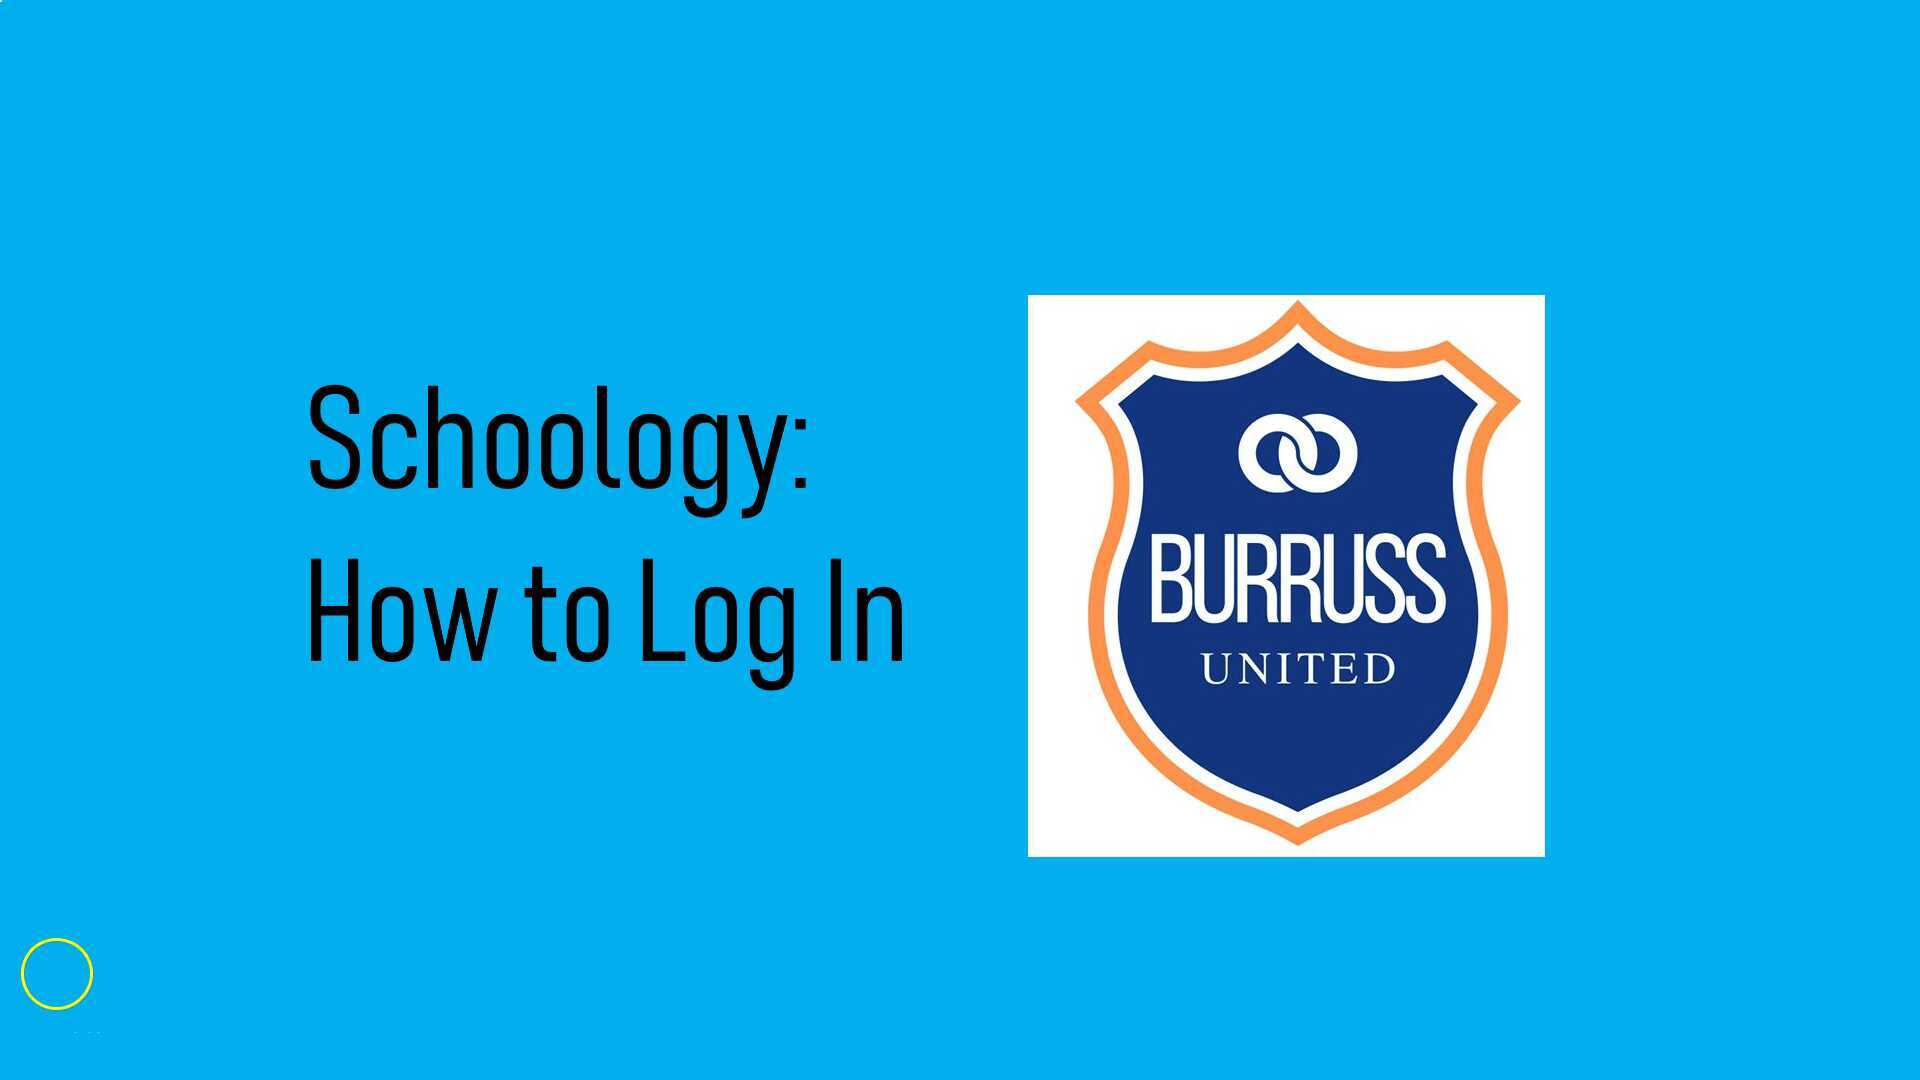 How to Log In to Schoology